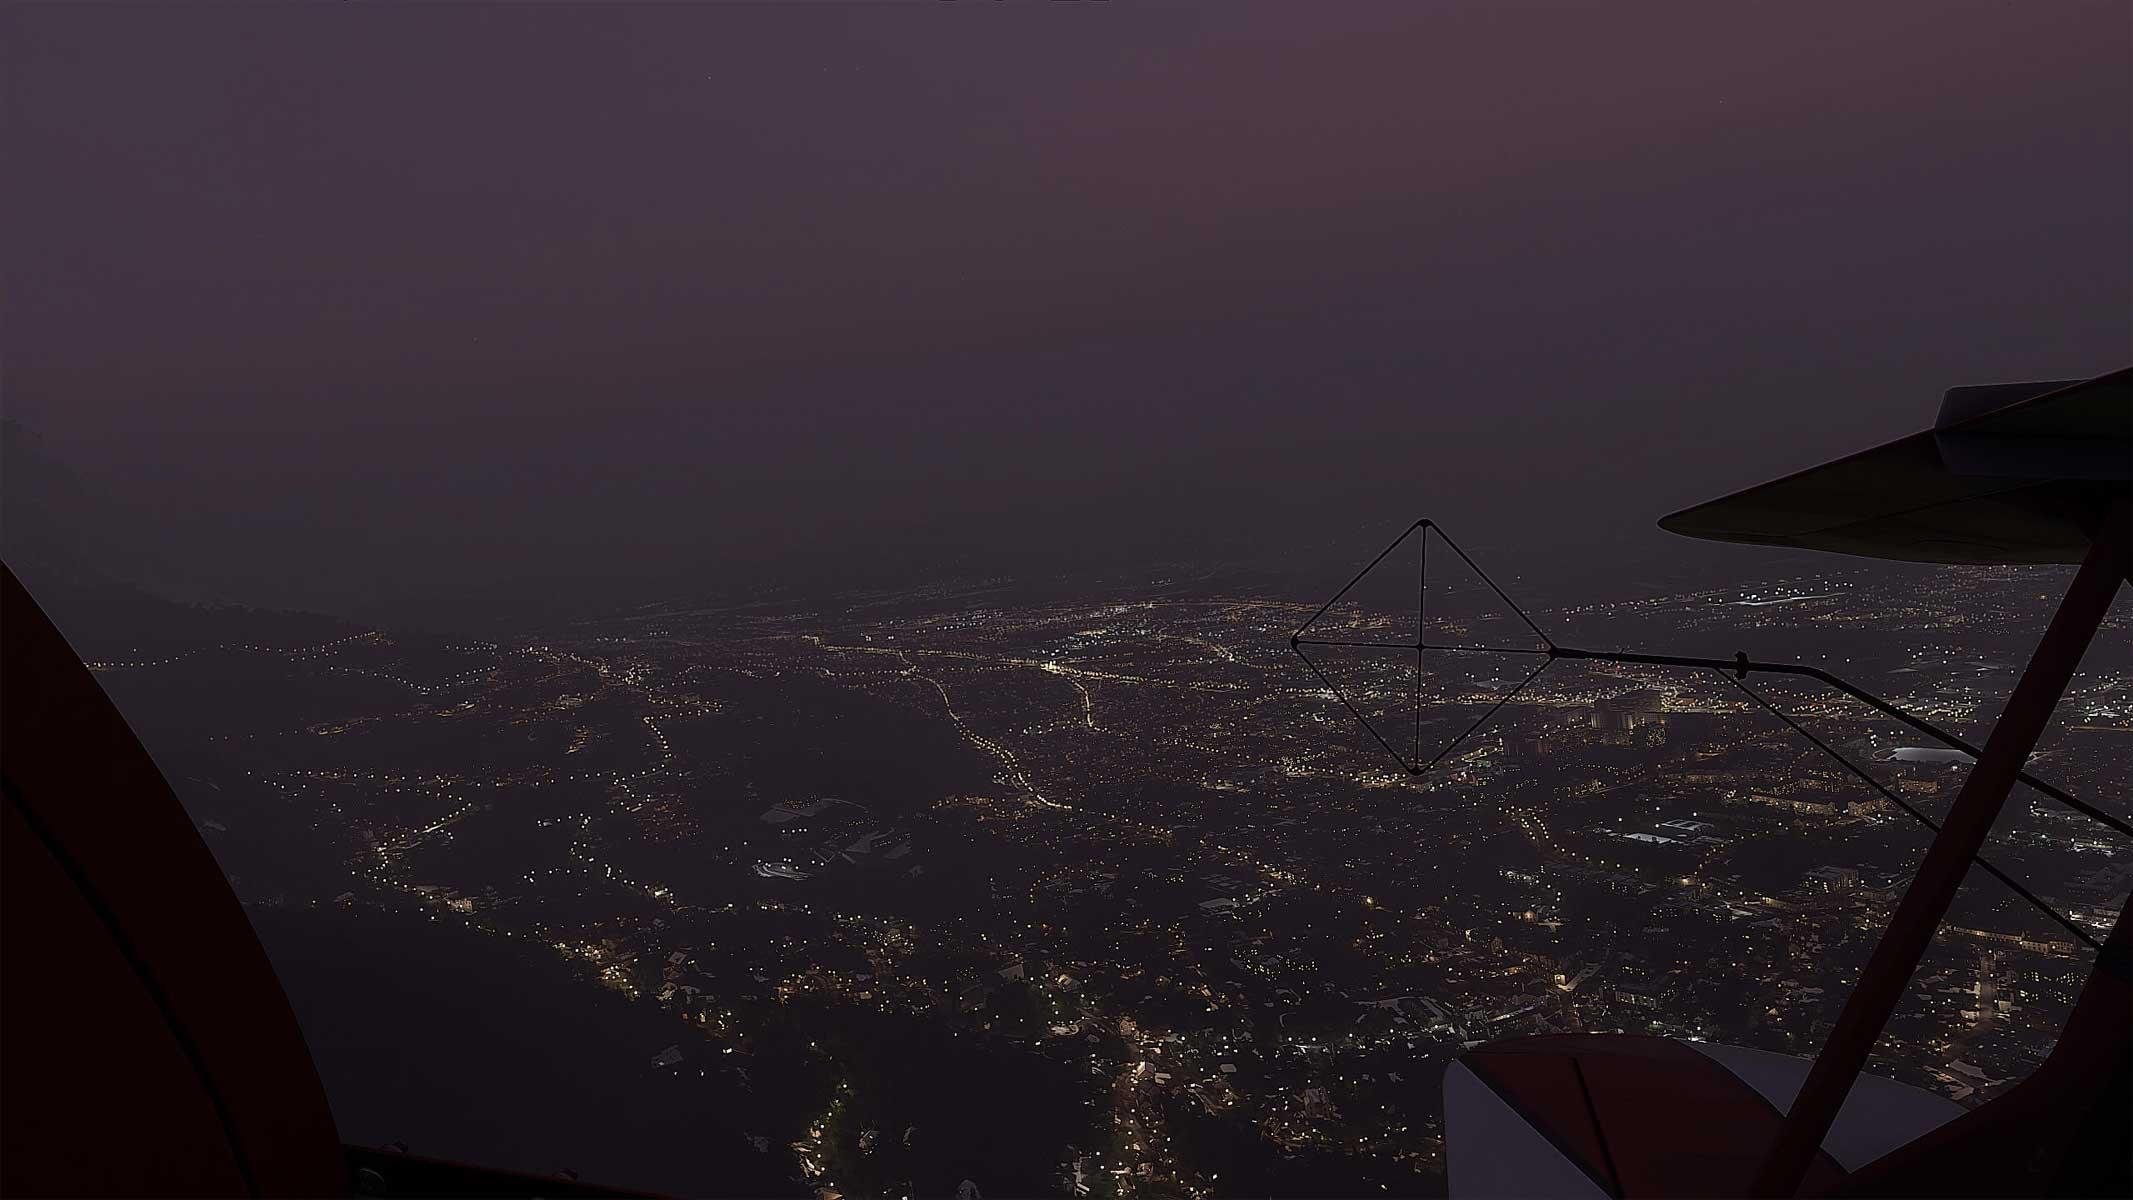 Bing Maps Make the Revived Flight Simulator Eerily Realistic